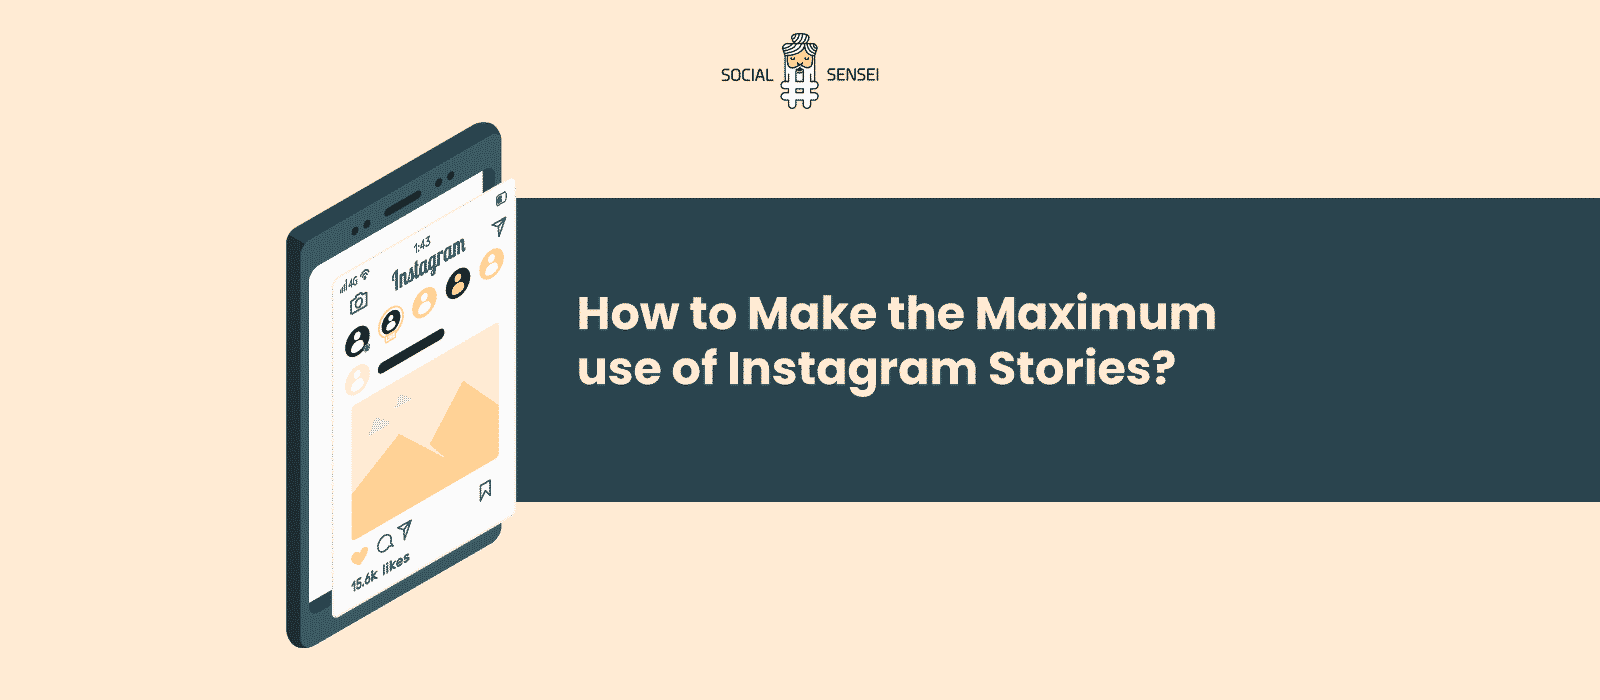 How to Make the Maximum use of Instagram Stories?